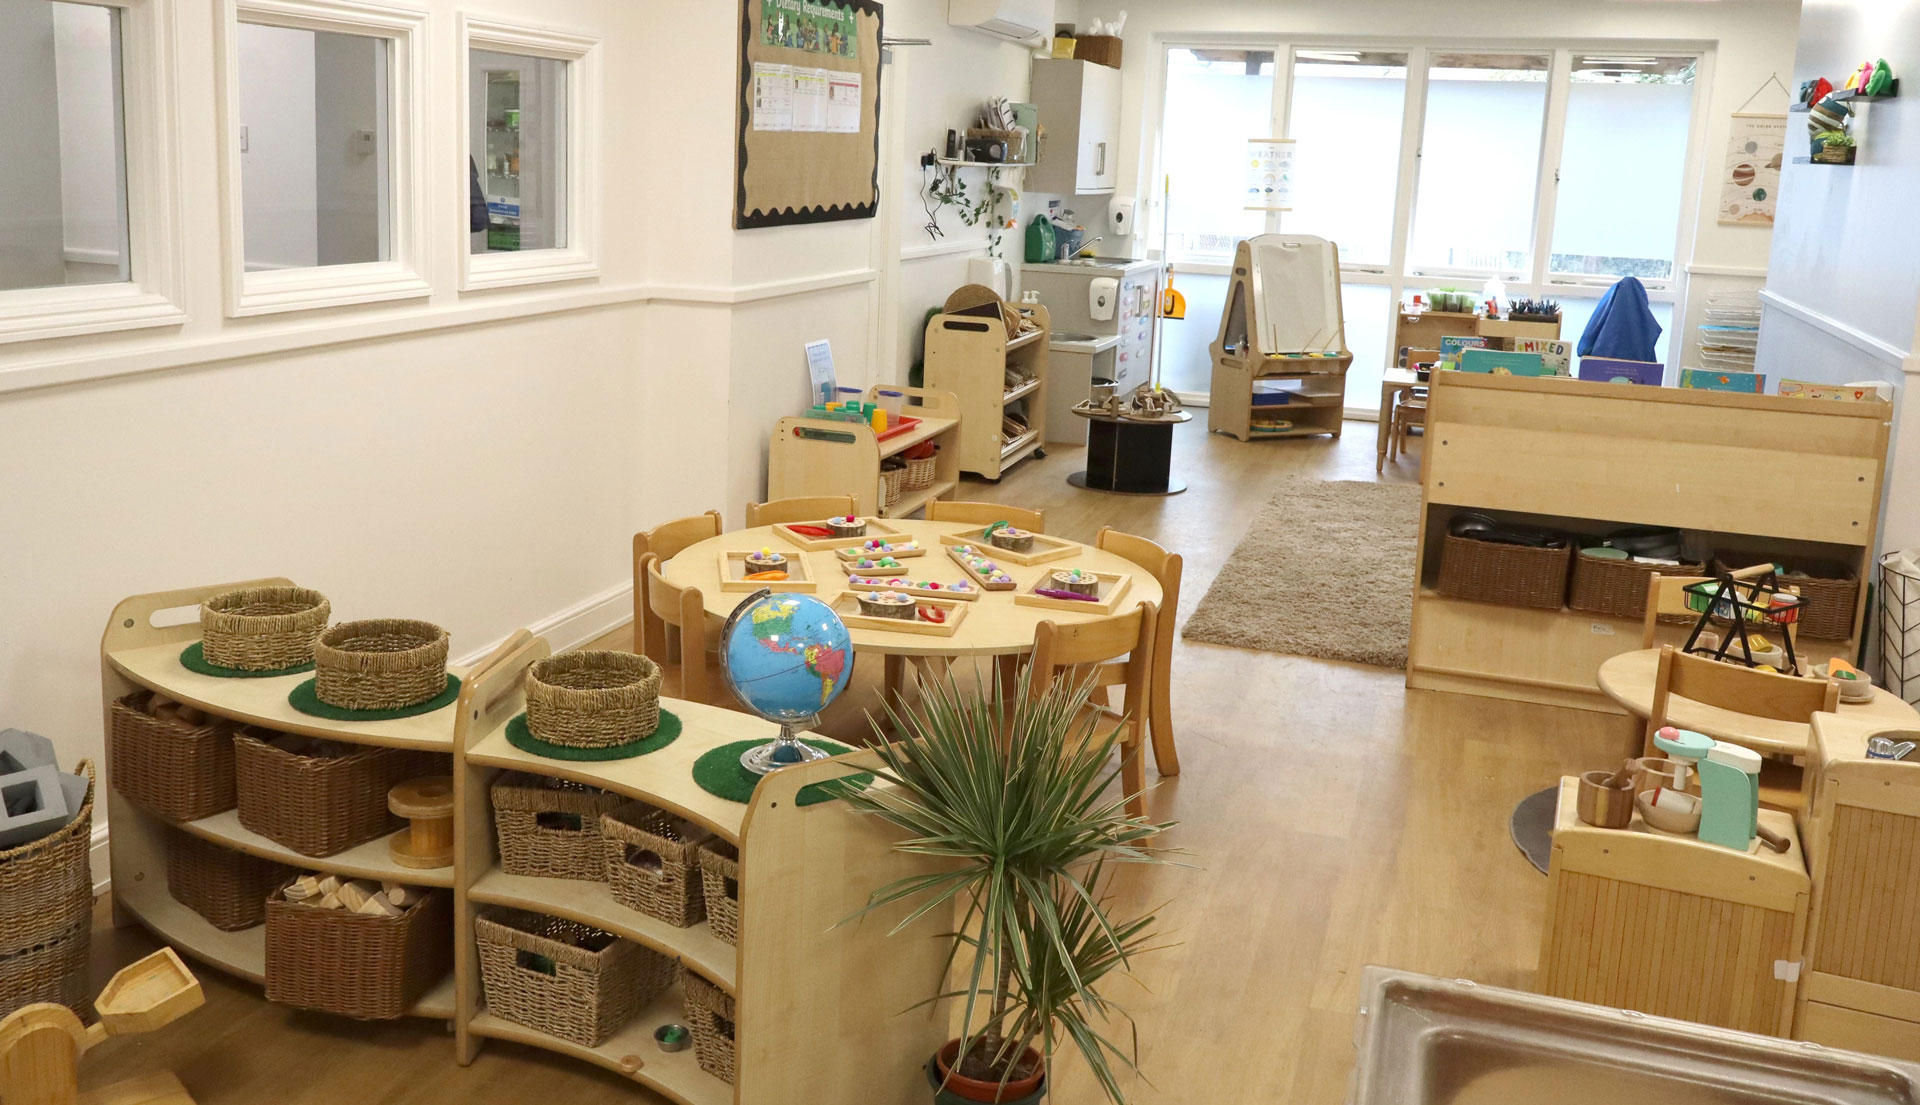 Crouch End Fields Day Nursery and Preschool toddler